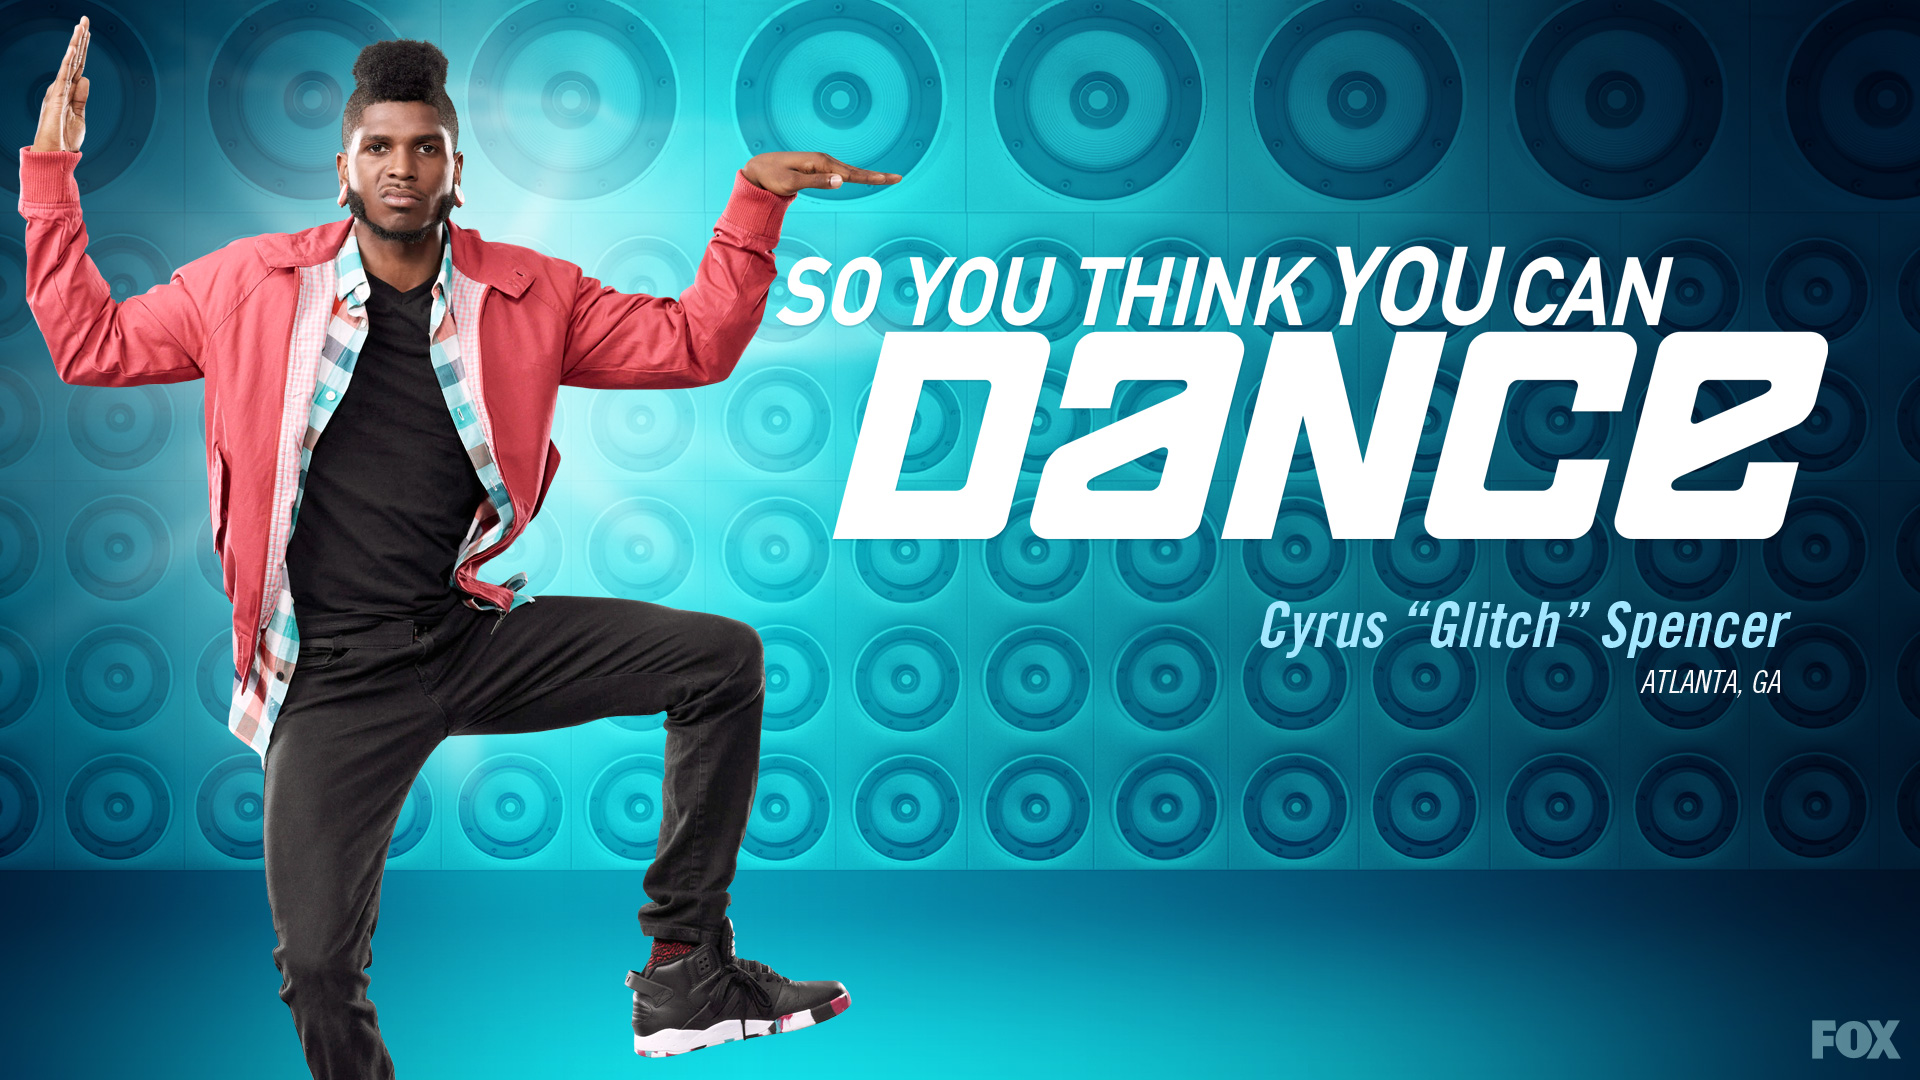 So You Think You Can Dance wallpaper 8